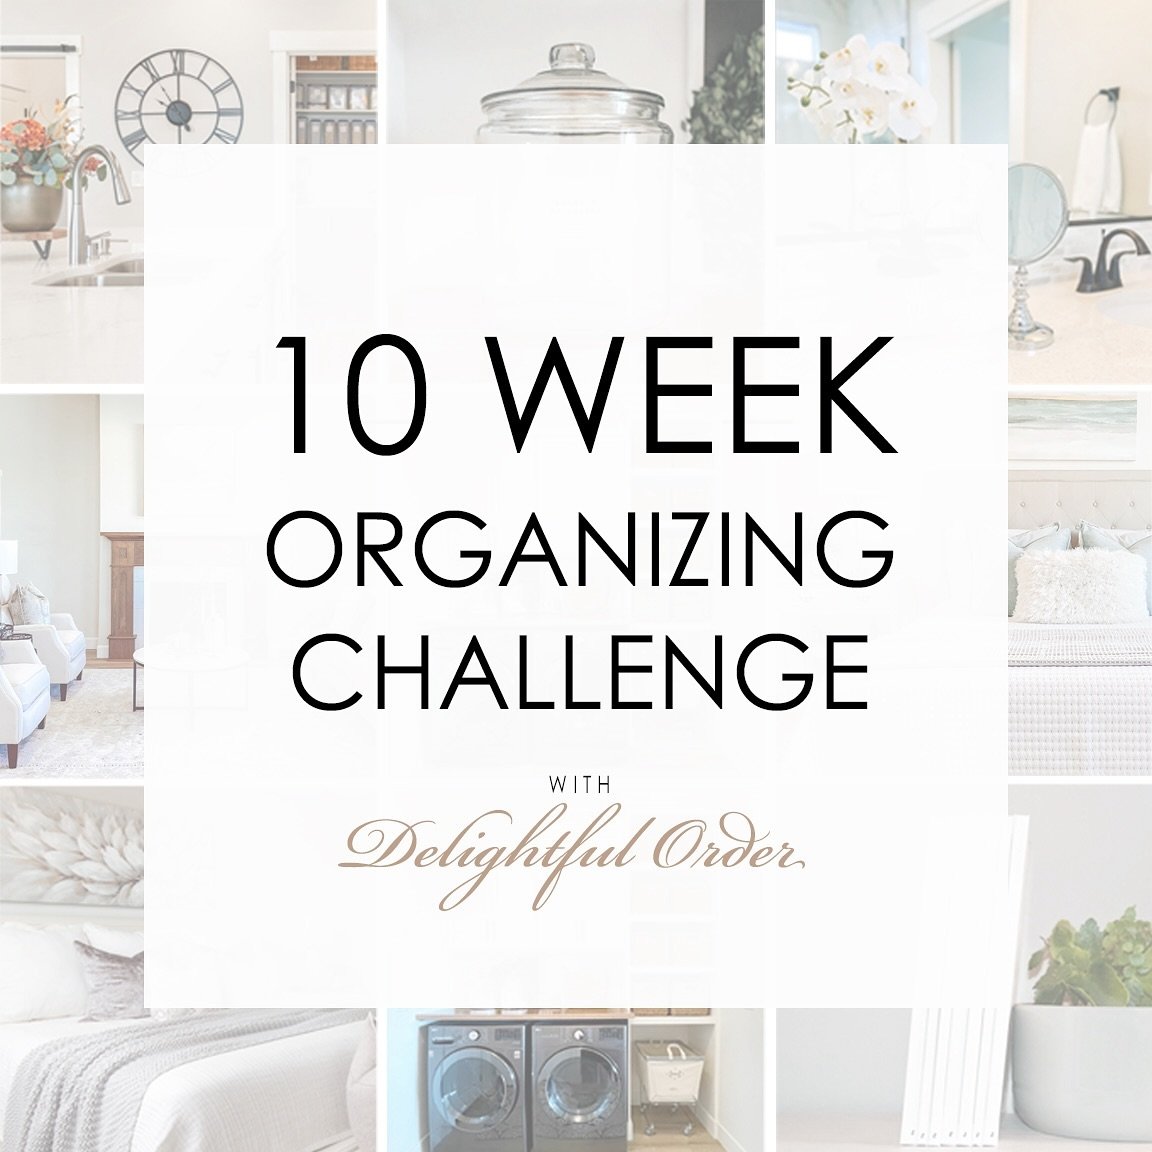 Join our brand new challenge! ✨

We start in 2 weeks!  More details can be found on our website. 

Comment &ldquo;challenge&rdquo; and I&rsquo;ll send the link!

#delightfulorder #getorganized #organization #cleanhome #declutteryourlife #simplifyyour